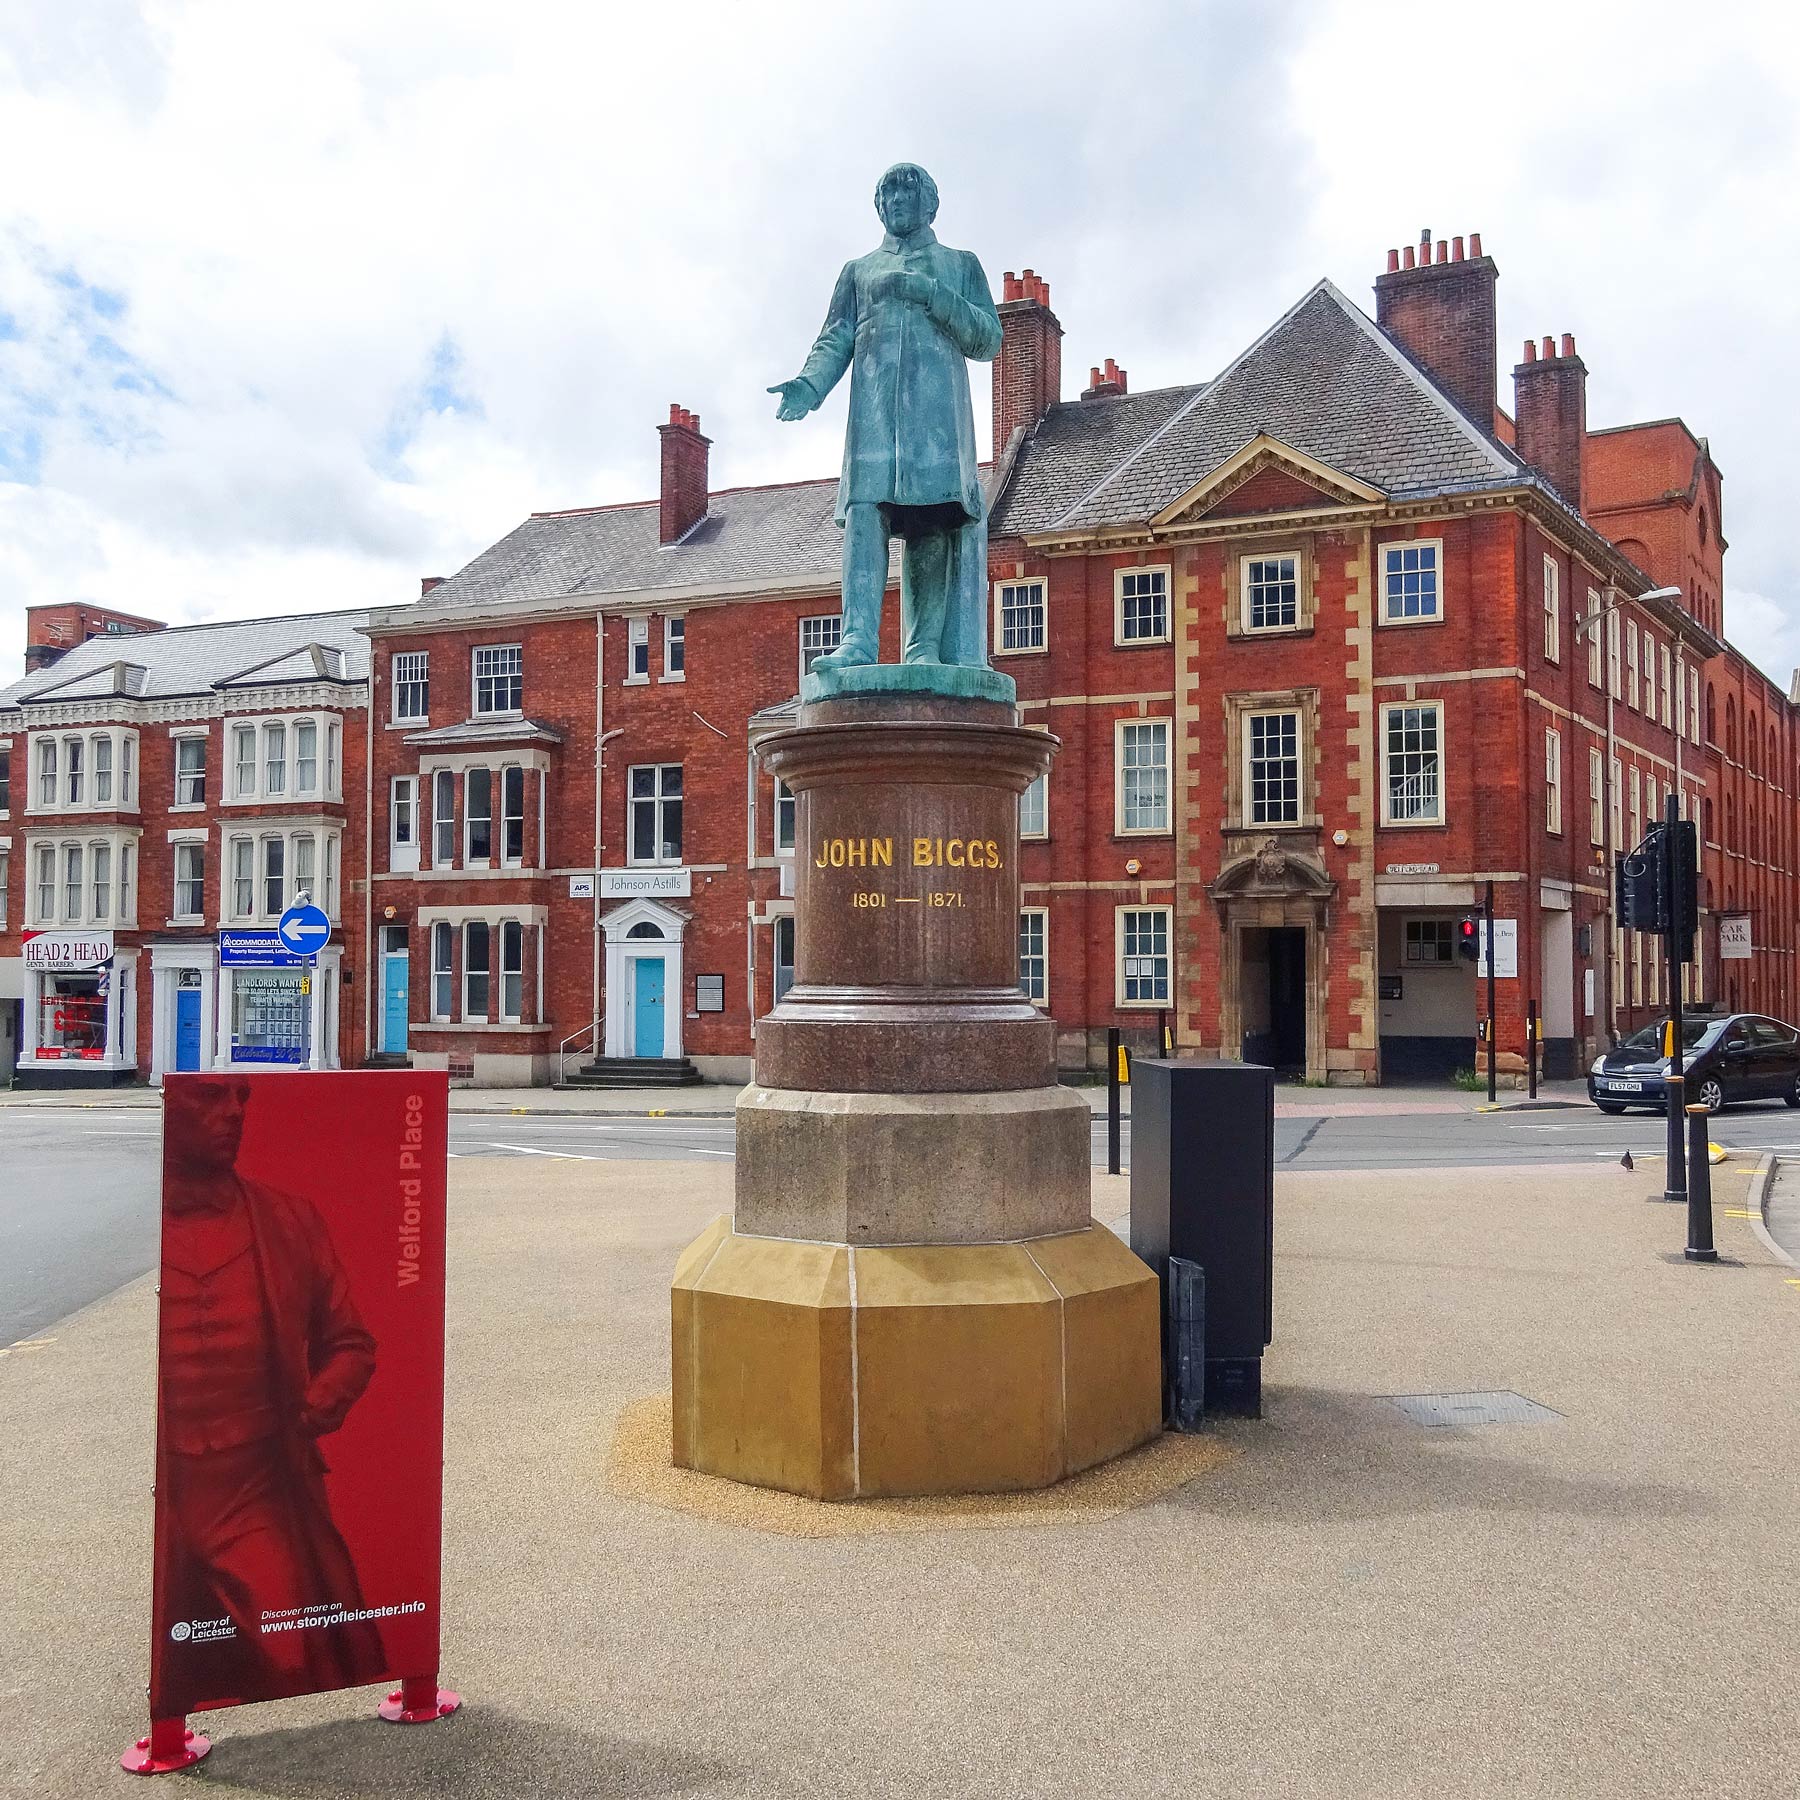 Photograph of the John Biggs statue green tinged, in the middle with one arm slighty out and hand open, on Welford Place a few metres past the end of Lower New Walk